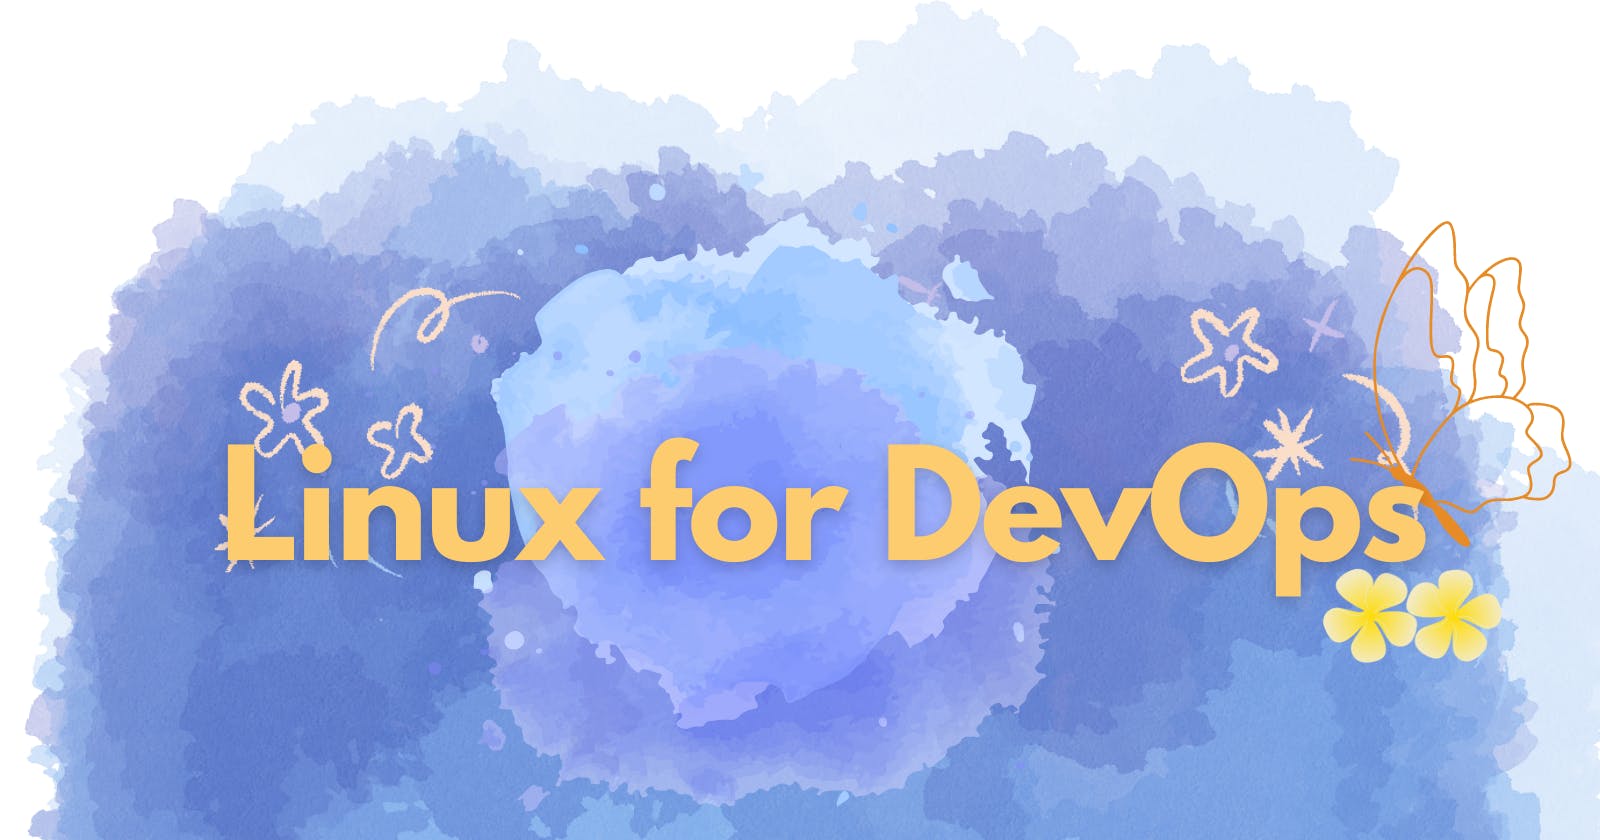 Linux for DevOps: What You Need to Know